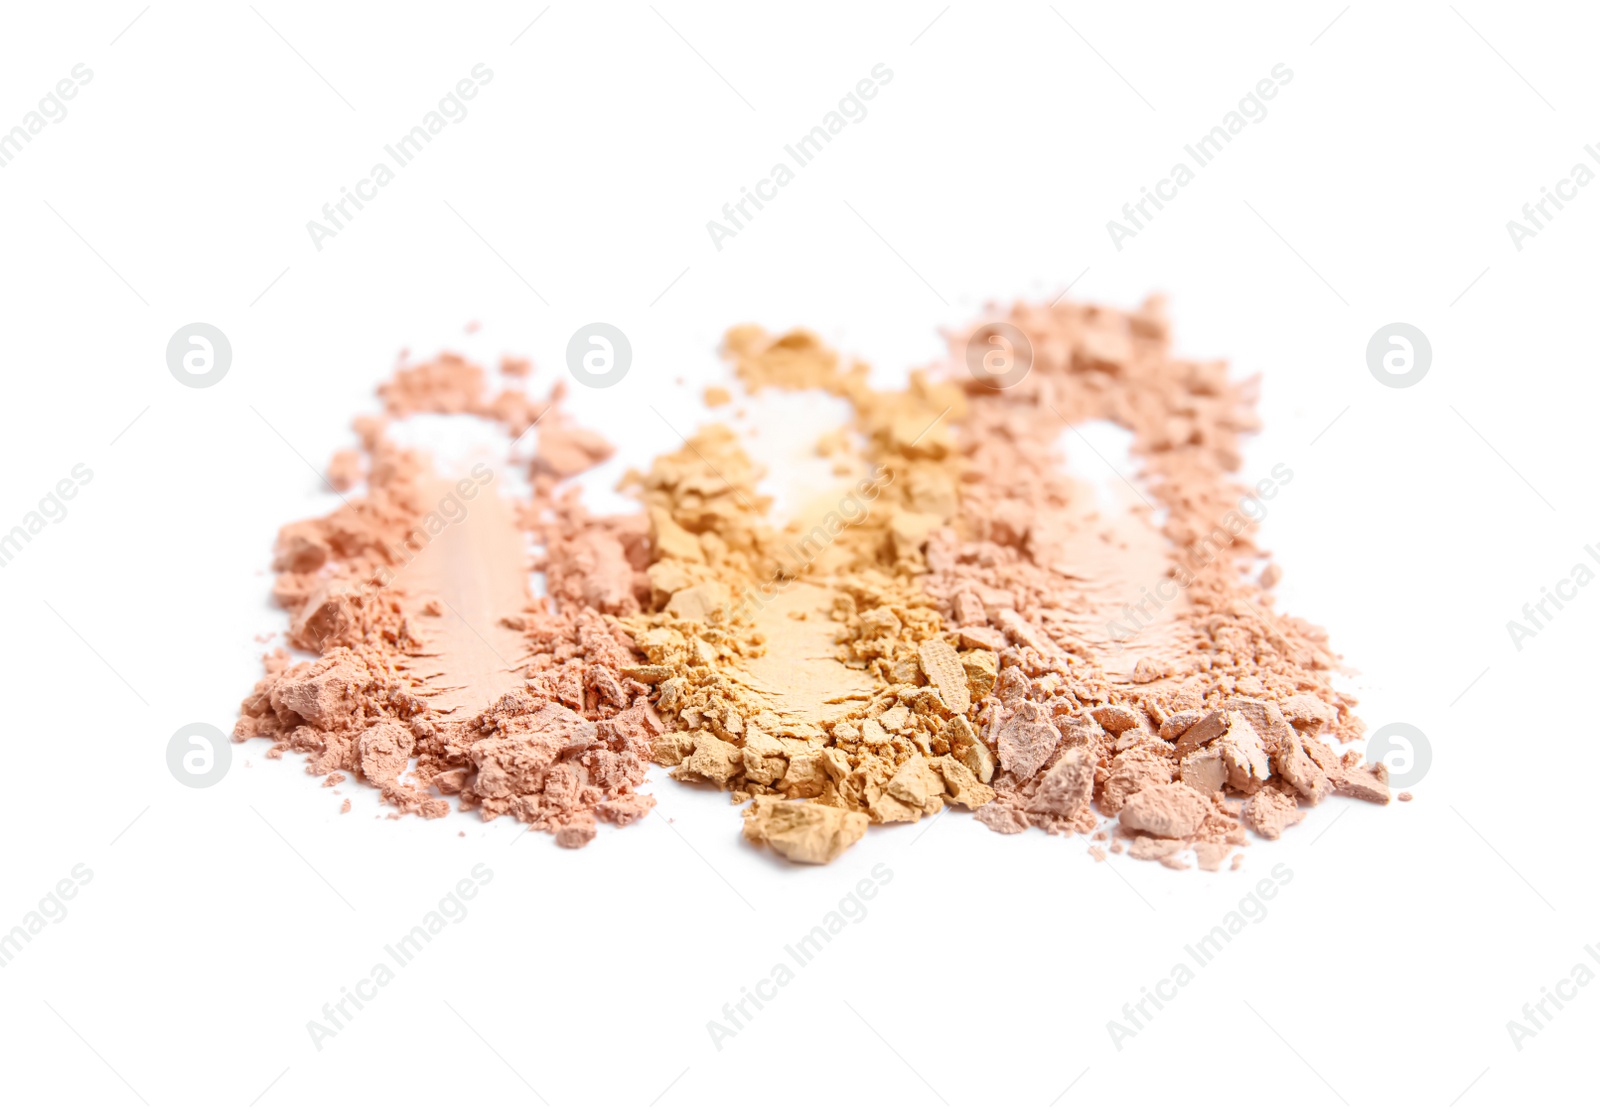 Photo of Swatches of different crushed face powders on white background